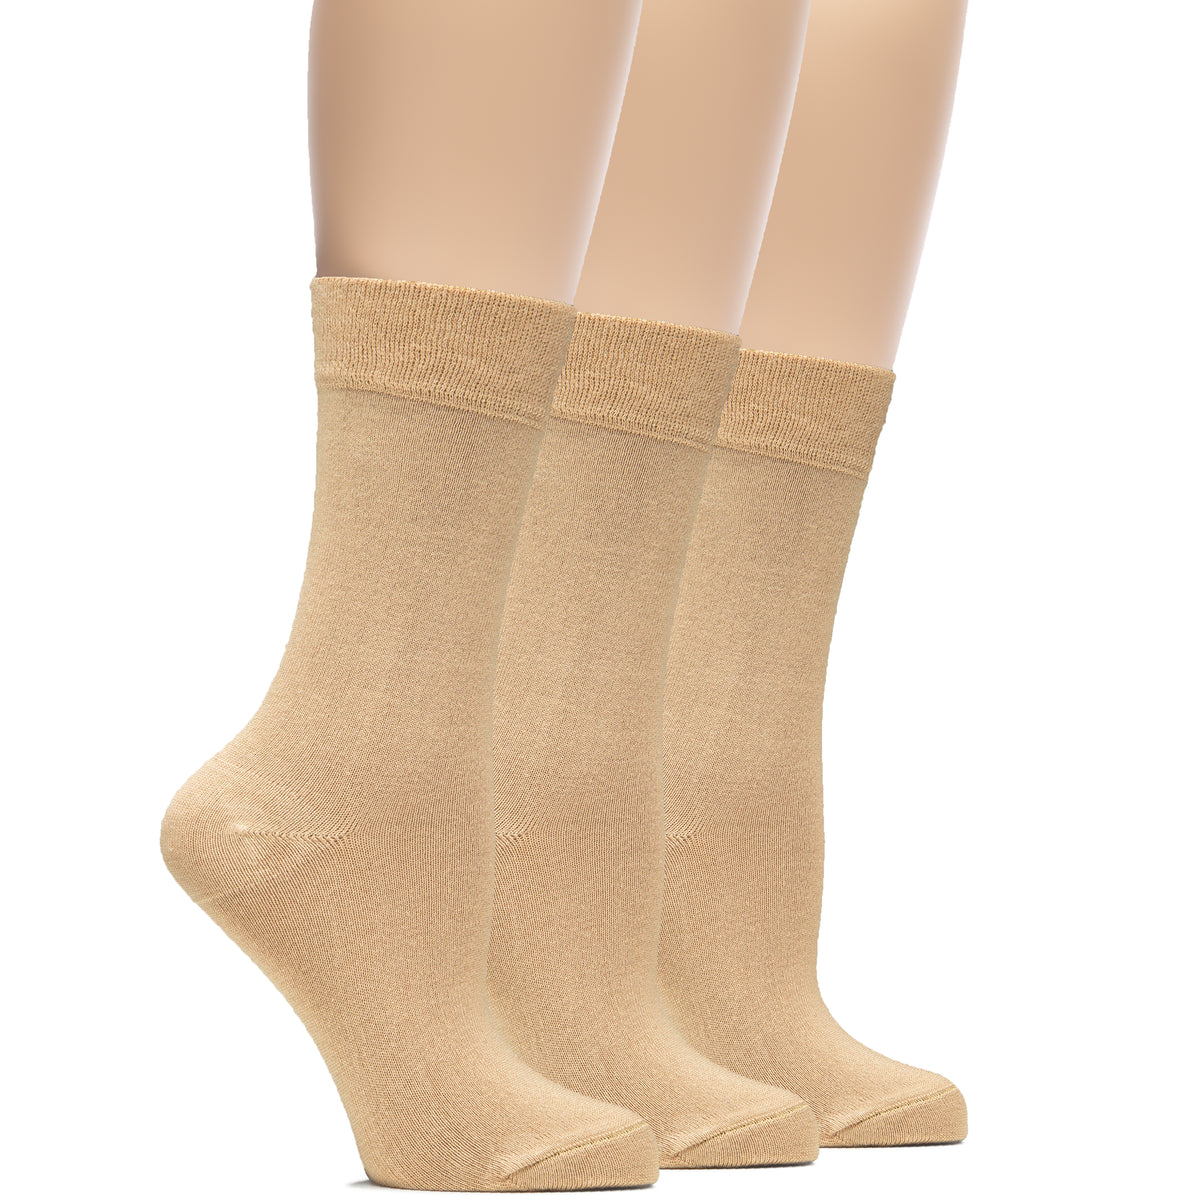 Elevate your sock game with these women's beige bamboo crew socks, designed for ultimate softness and durability.